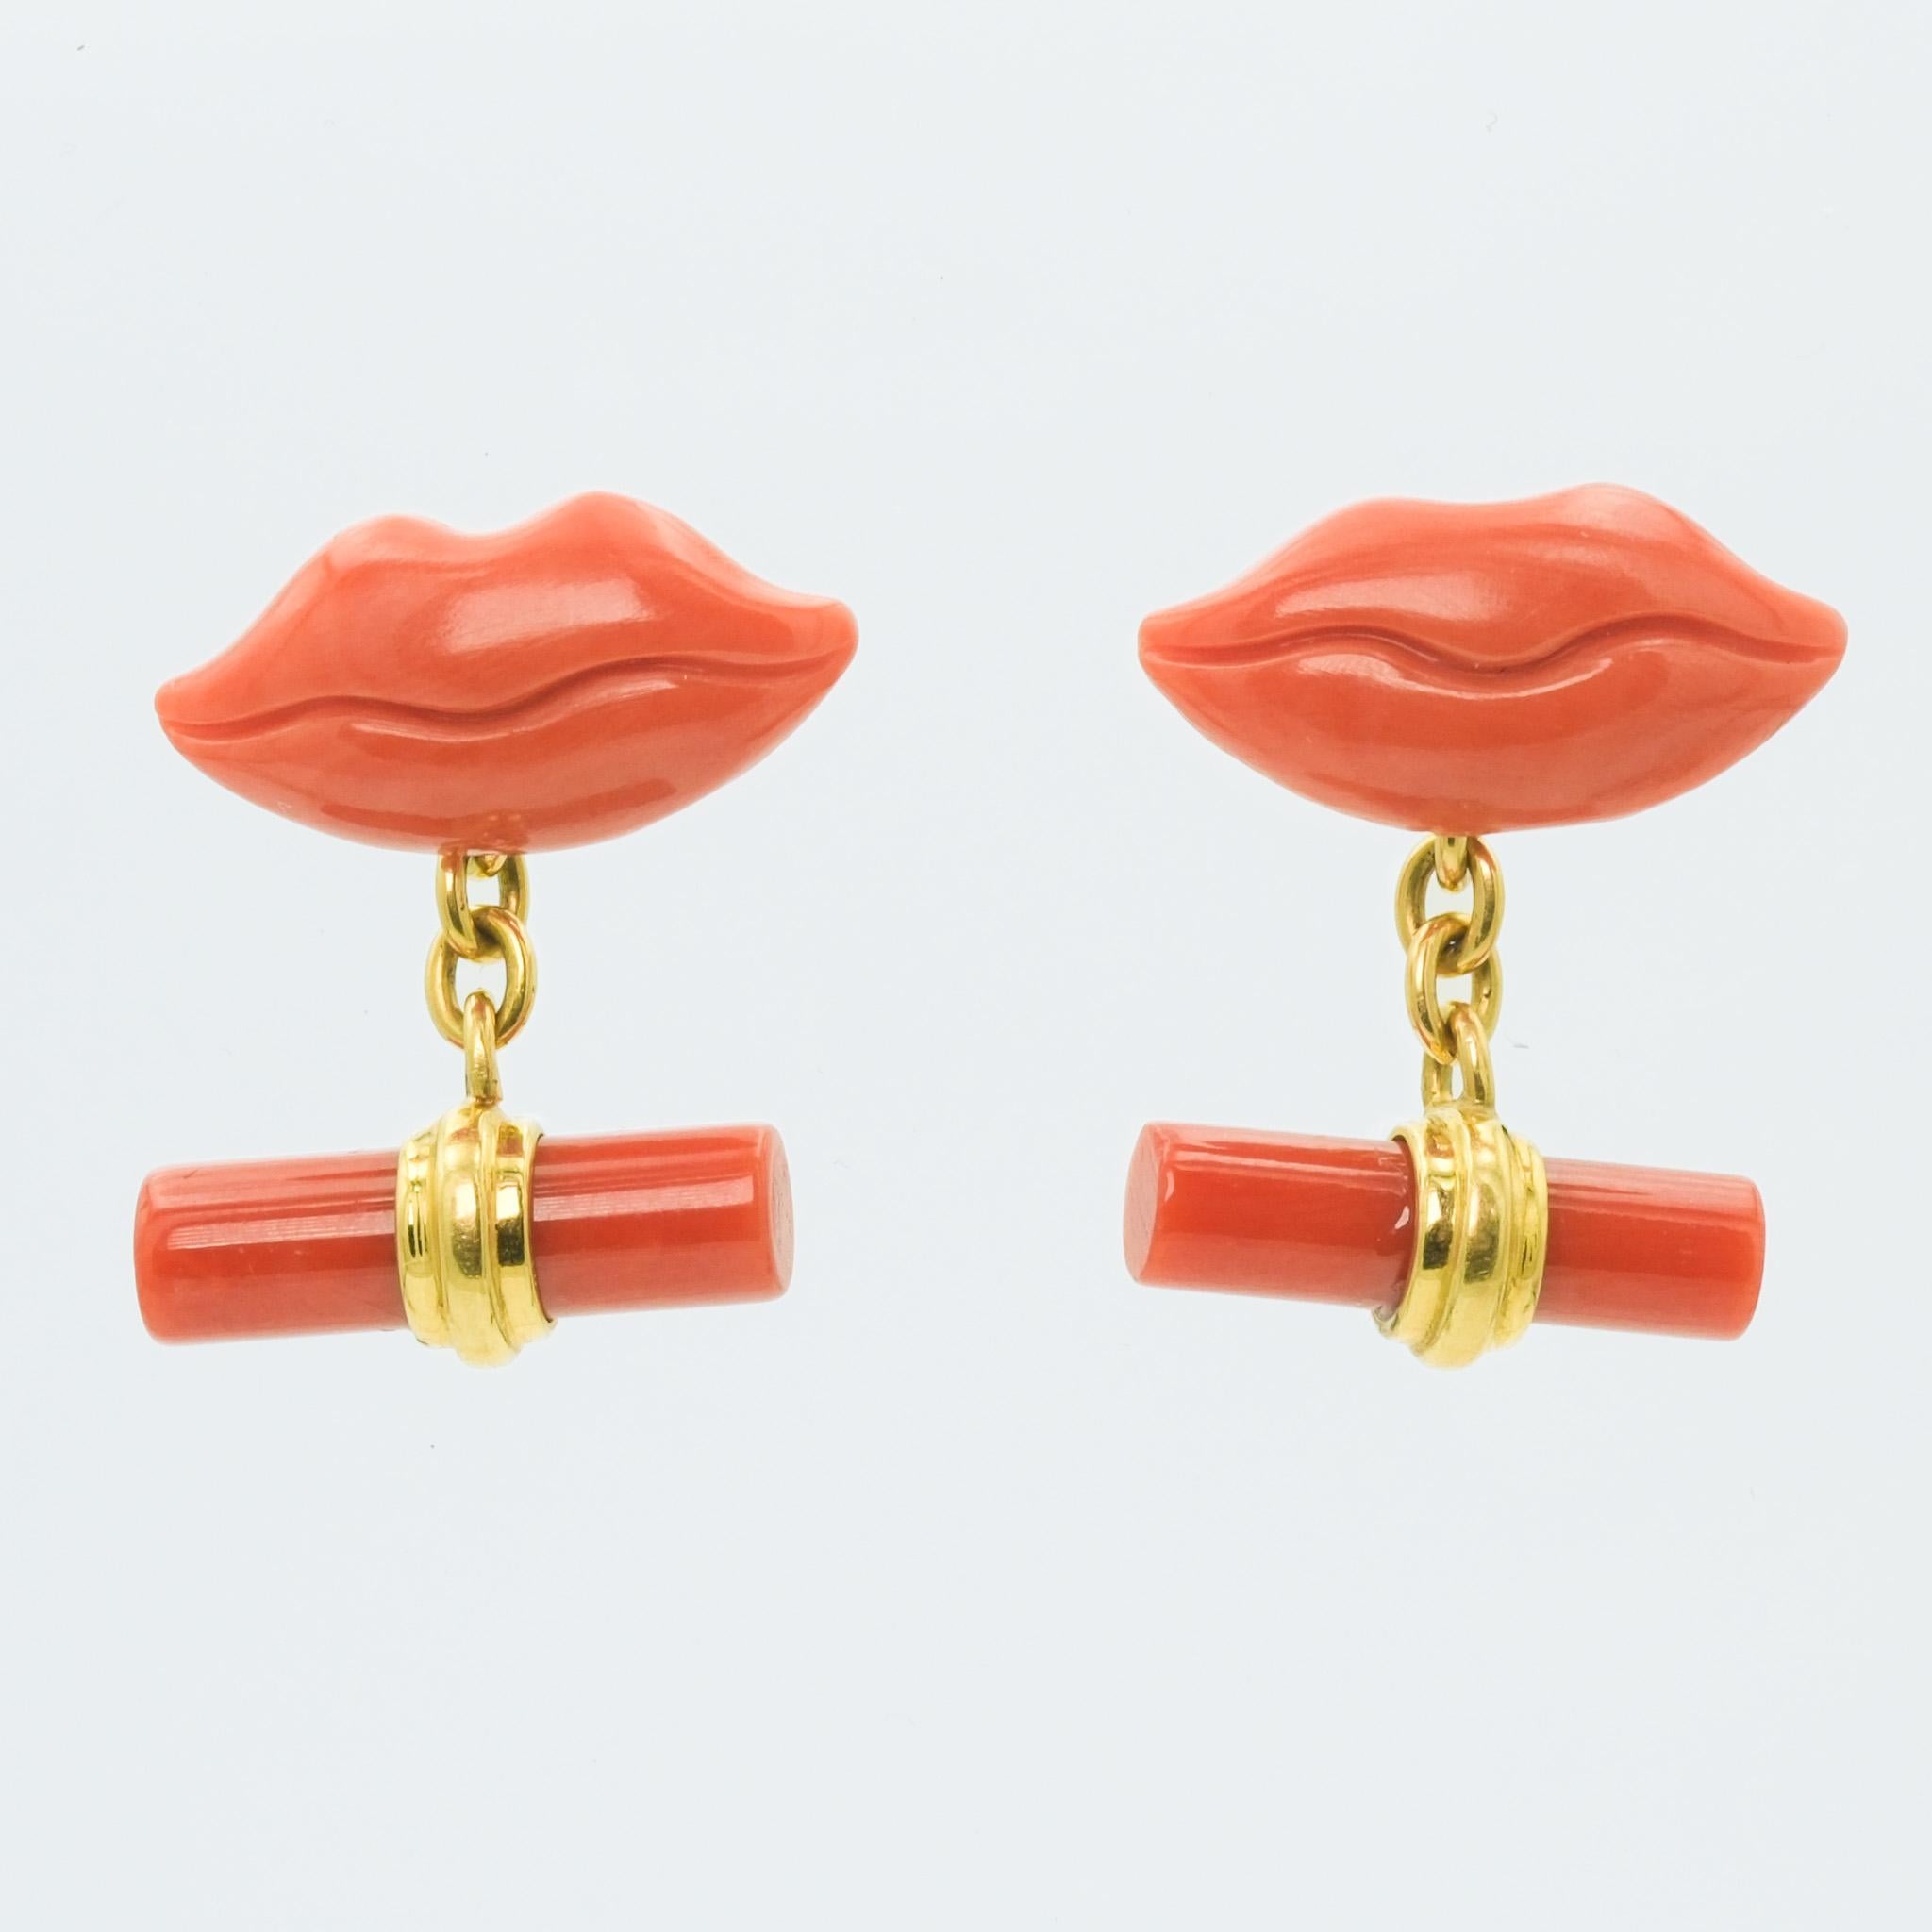 These contemporary coral lip cufflinks offer an eye-catching blend of whimsy and elegance, crafted in 14 karat yellow gold. The vibrant pink, salmon coral strike a bold contrast against the rich gold, make these funky cufflinks a distinct accessory